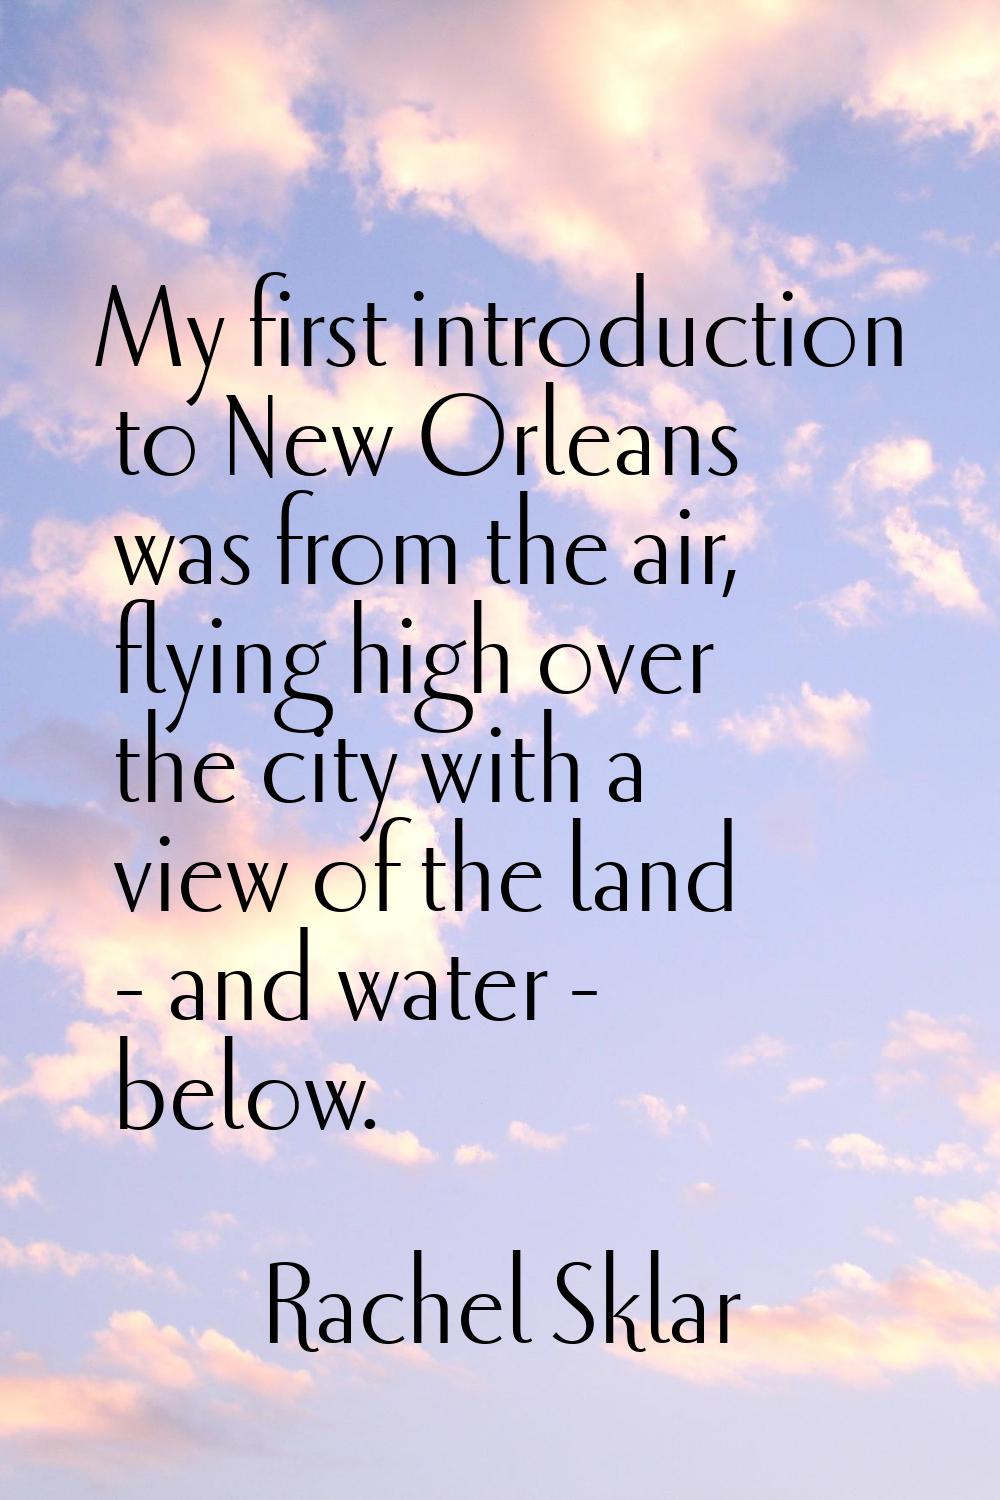 My first introduction to New Orleans was from the air, flying high over the city with a view of the